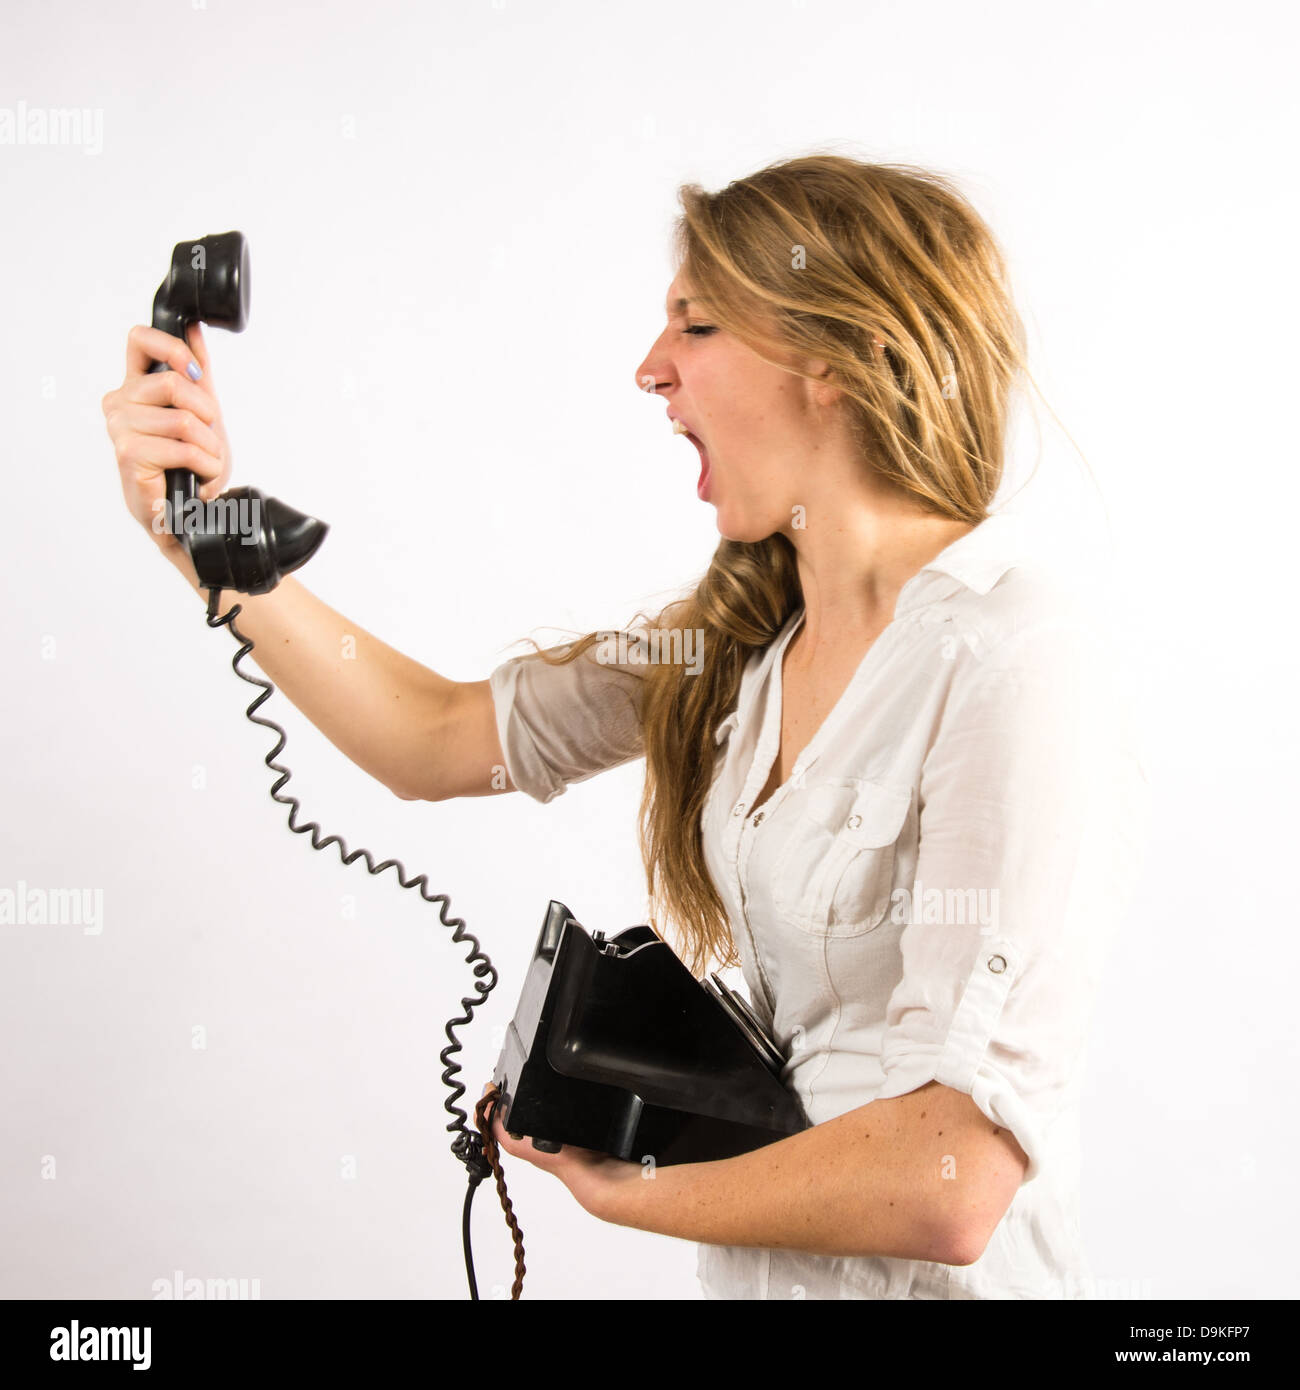 Poor customer helpline service: An angry young woman shouting yelling into an old retro telephone receiver Stock Photo